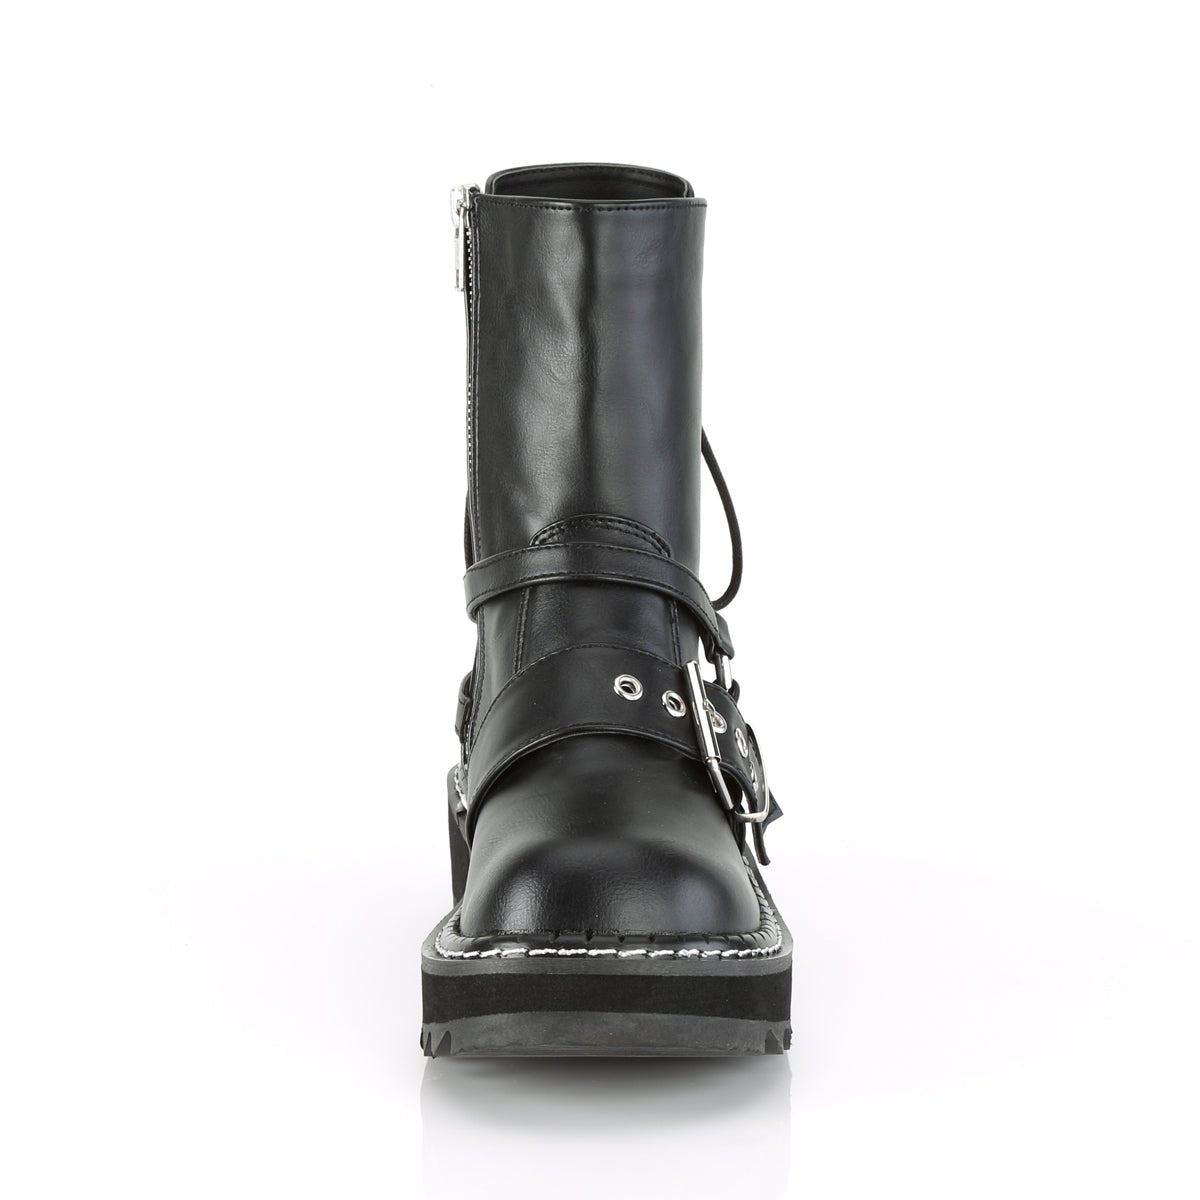 Too Fast | Demonia Lilith 210 | Black Vegan Leather Women's Ankle Boots